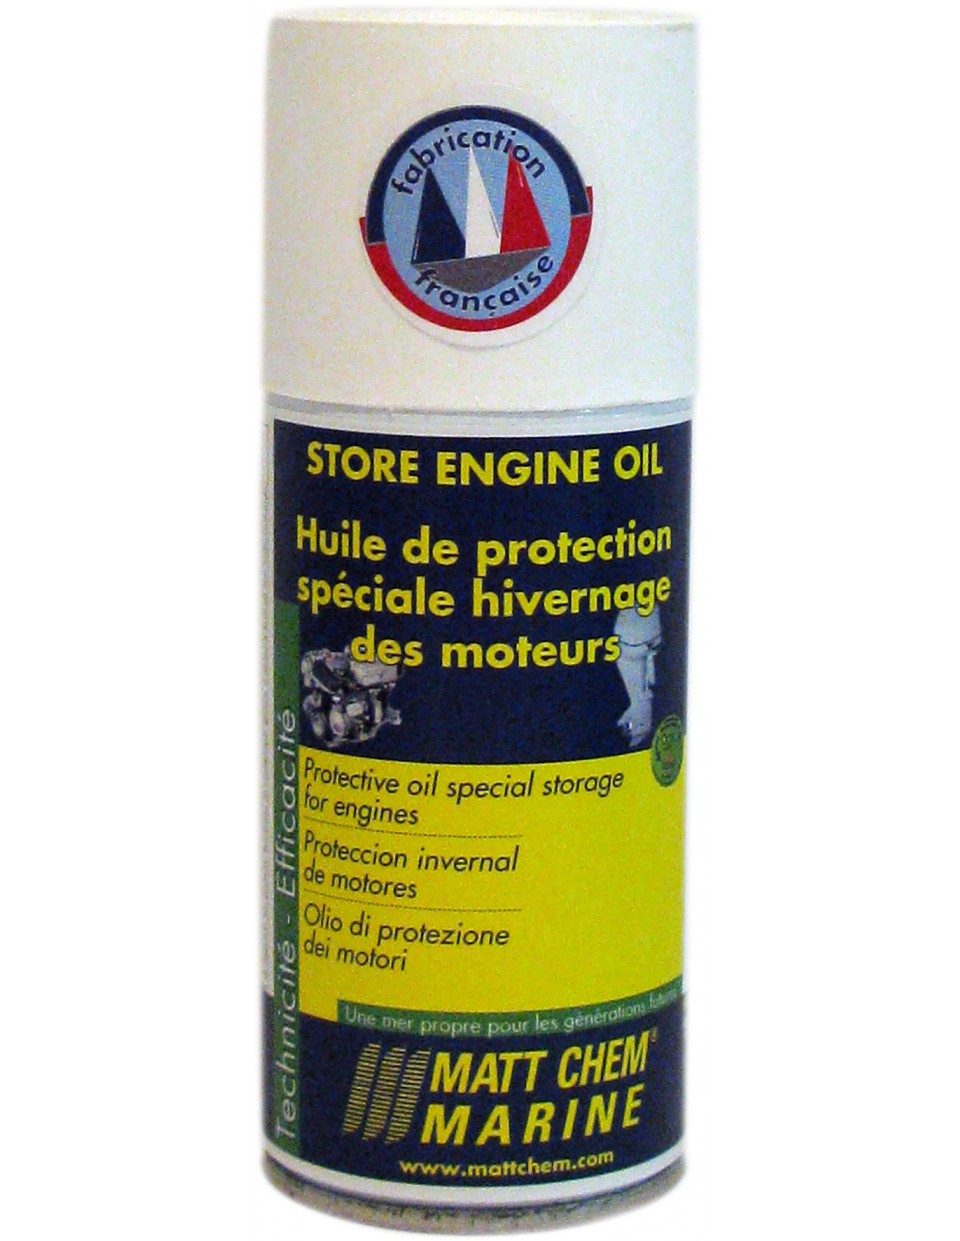 STORE ENGINE OIL